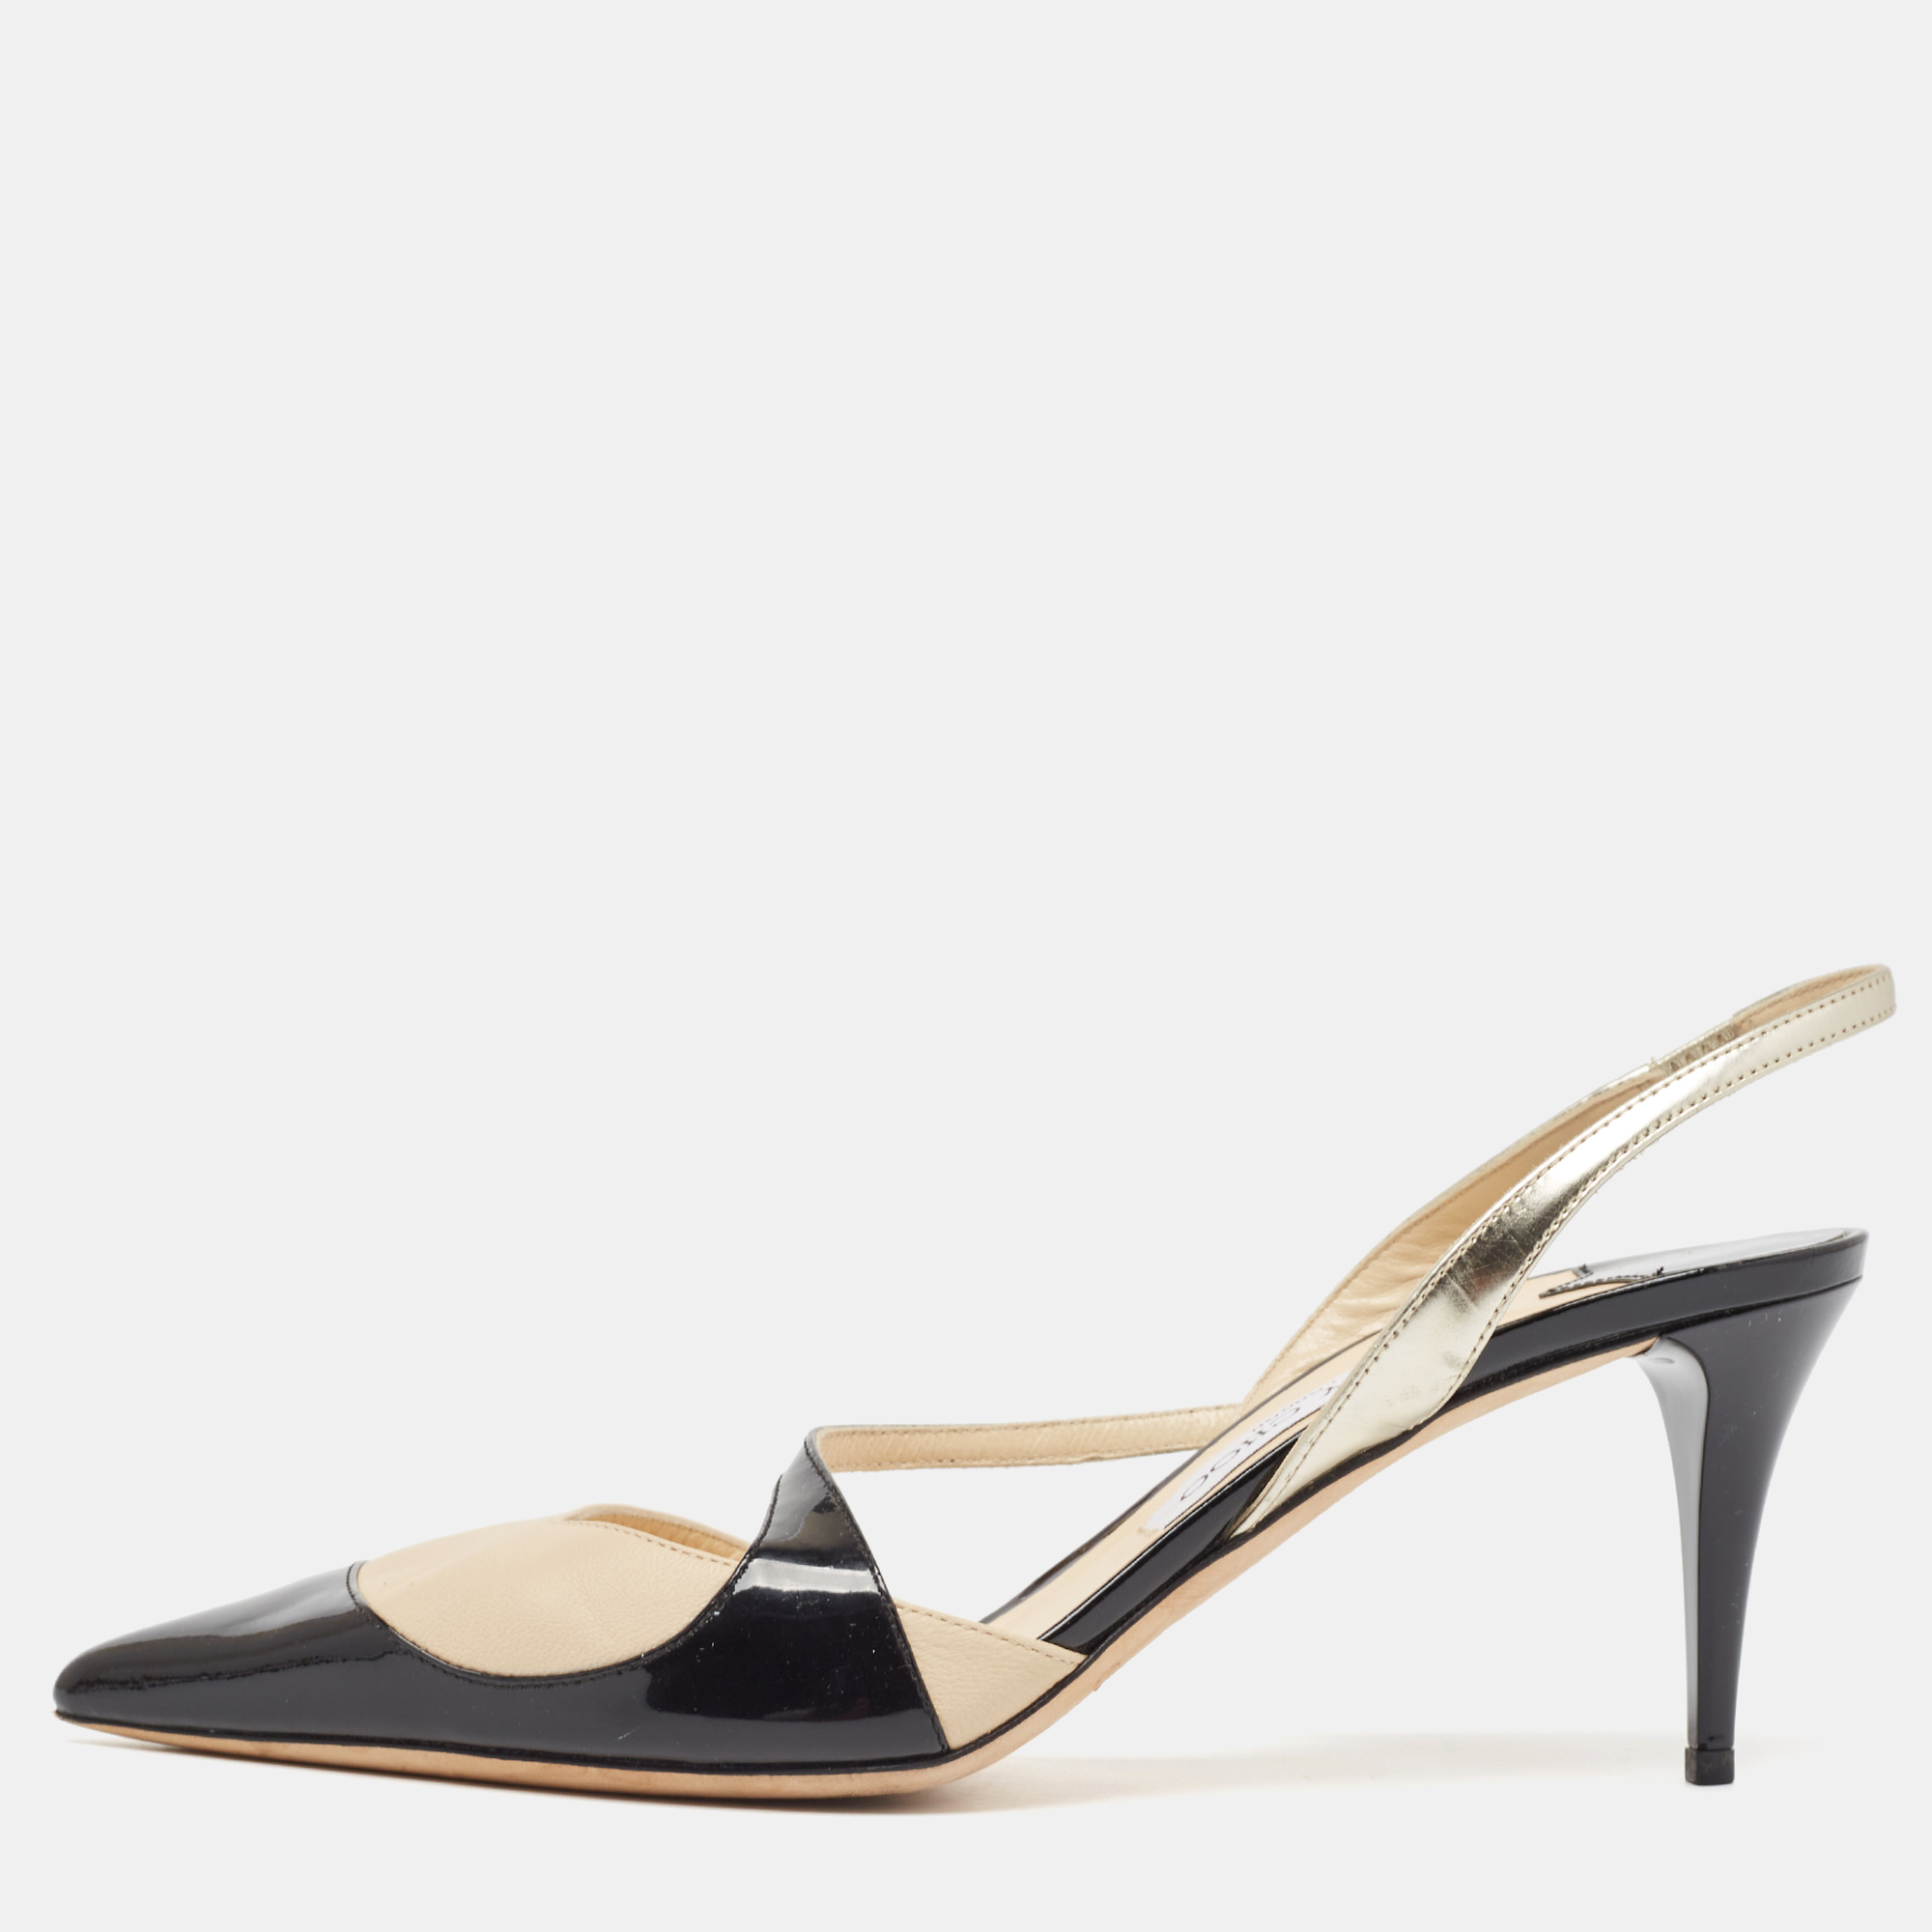 

Jimmy Choo Black/Beige Leather and Patent Slingback Pumps Size